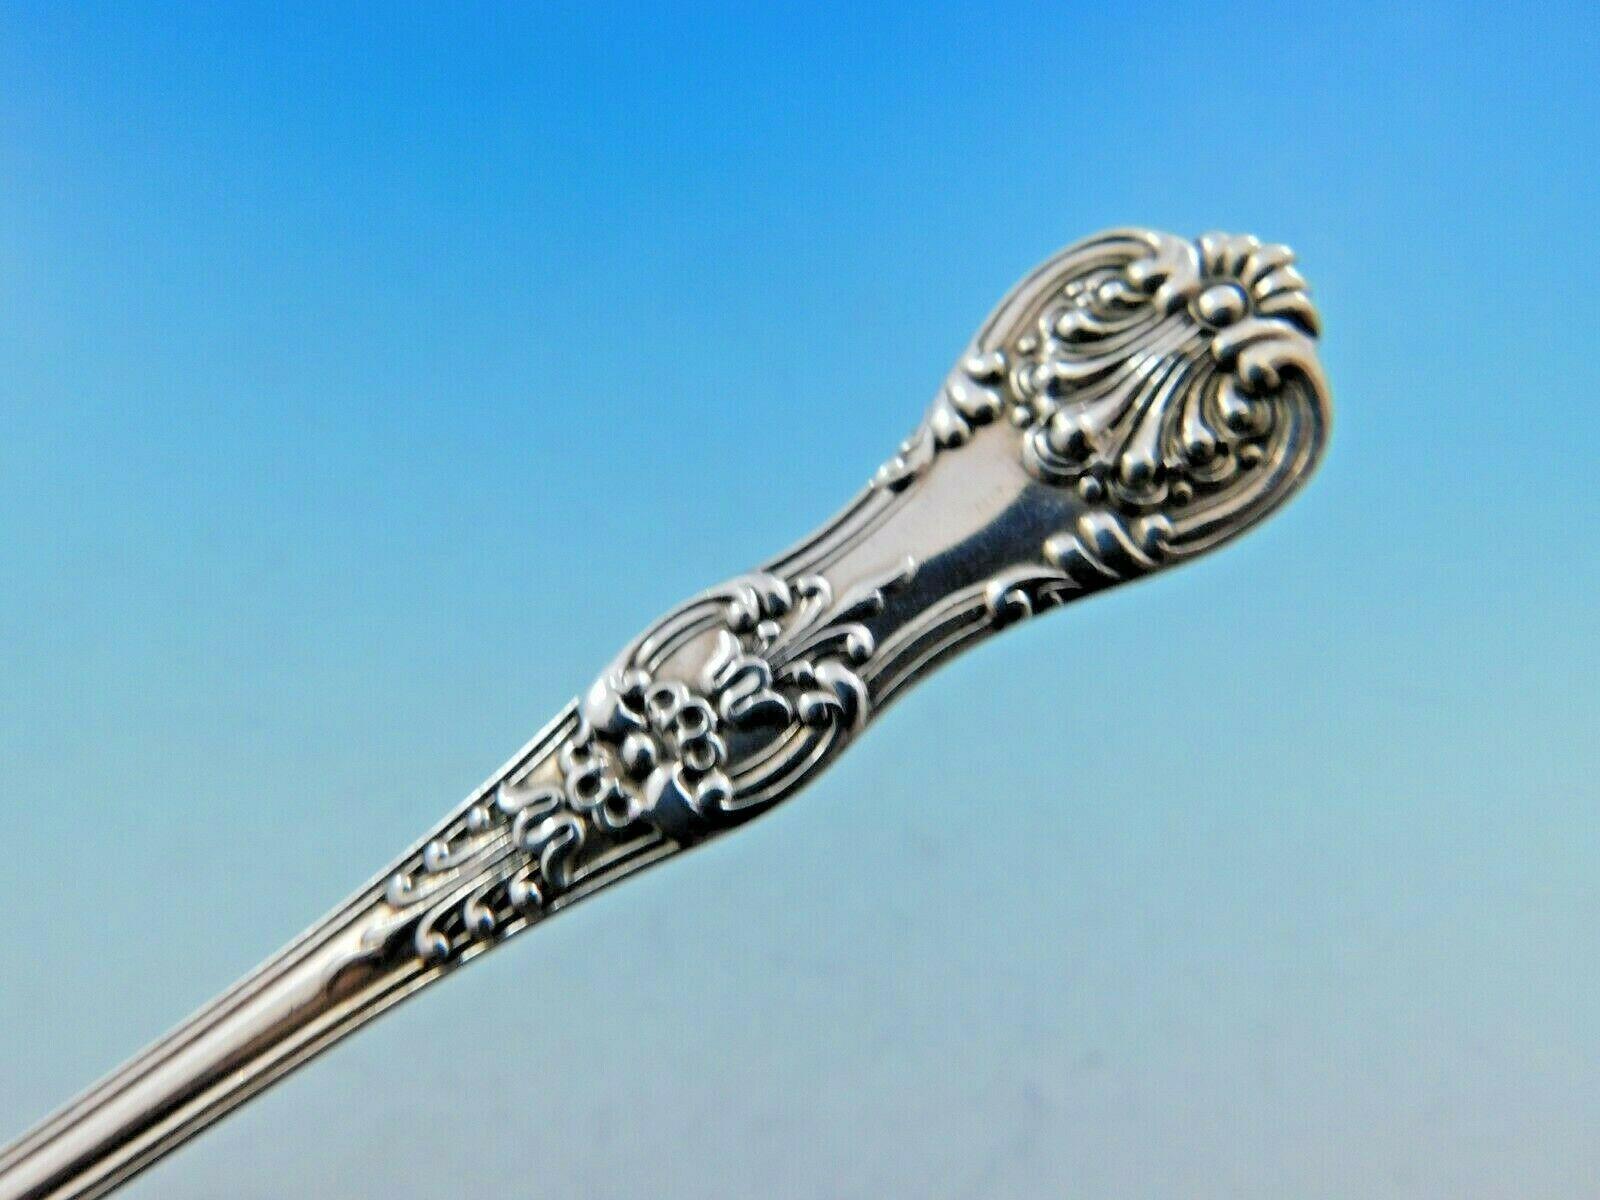 English King (circa 1885)

Patterns similar to our English King were first used in France and England late in the 18th century and have remained among the most popular styles for flatware today, in both Europe and America. Tiffany & Co. first made